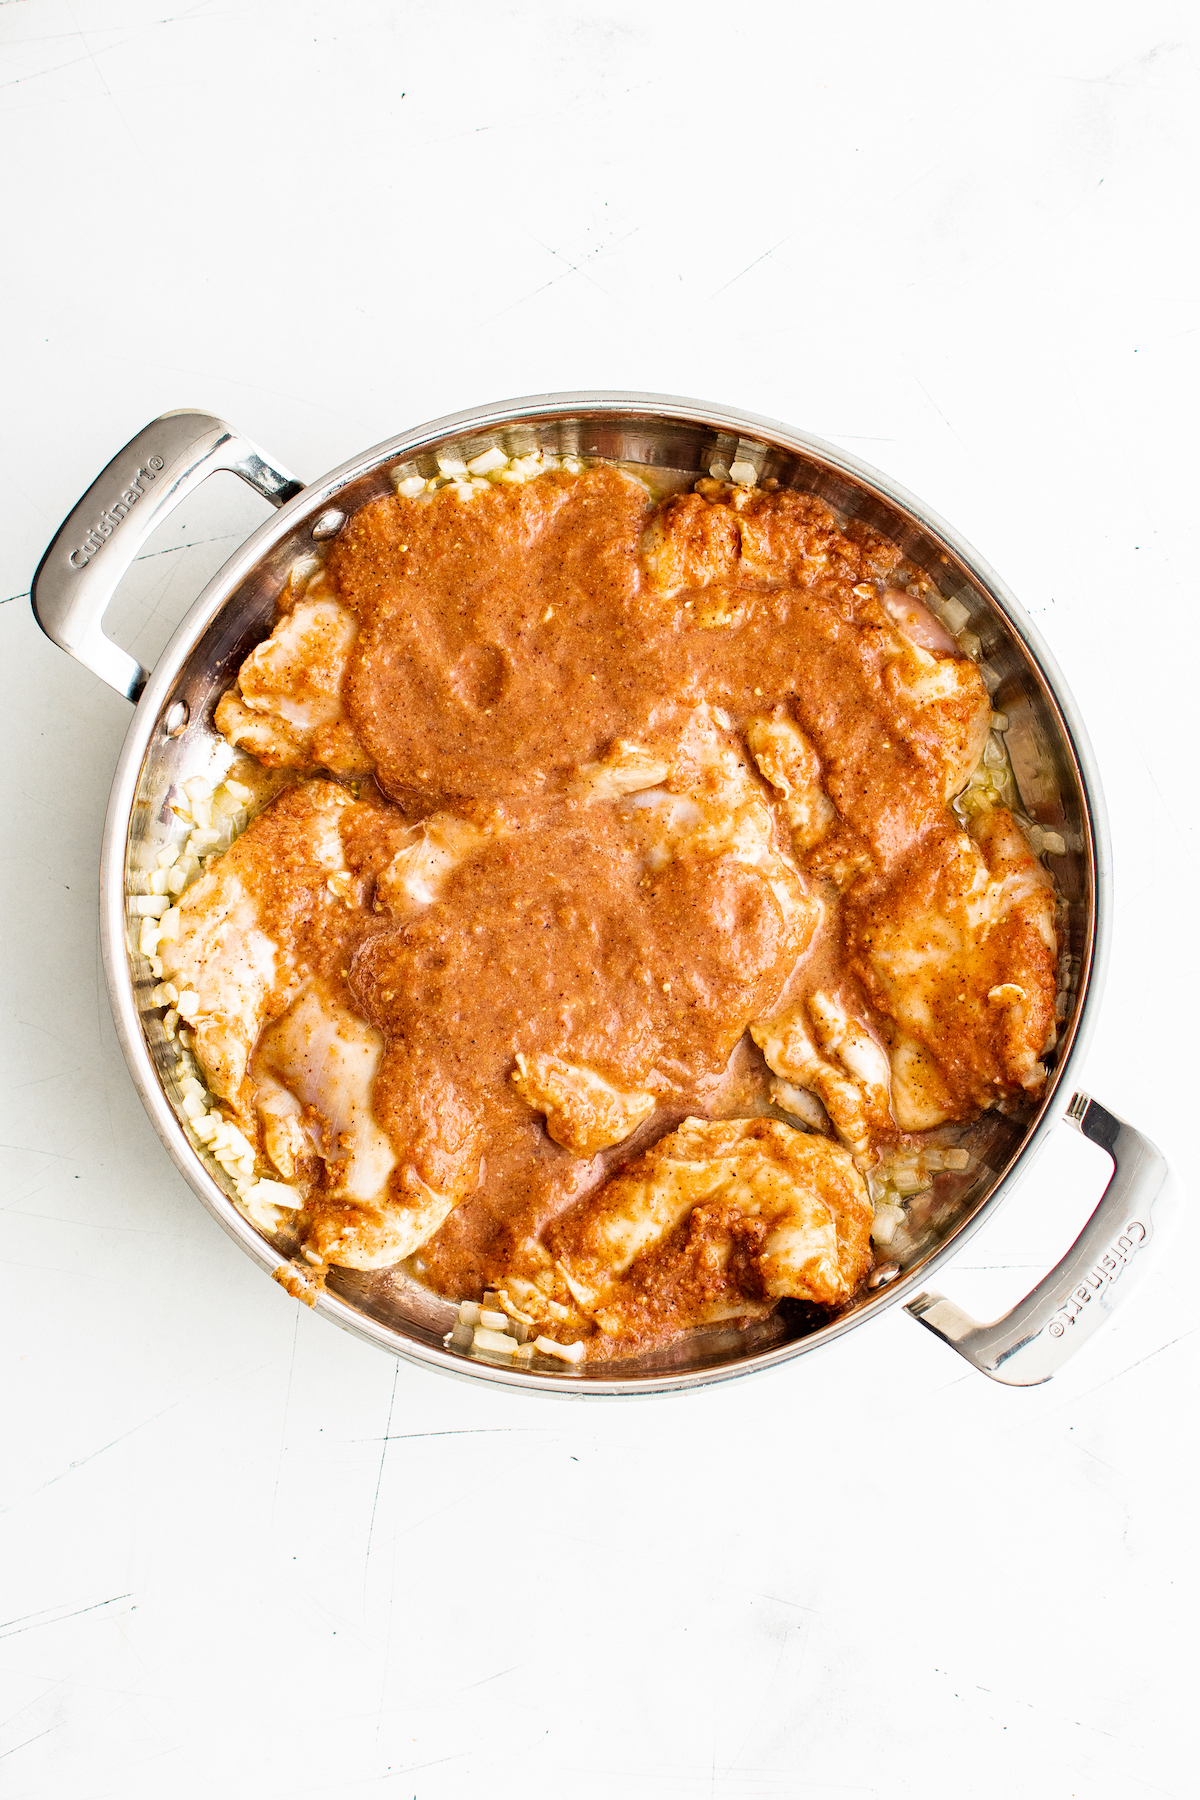 Aerial view of achiote chicken cooking in a pan, with the top still raw